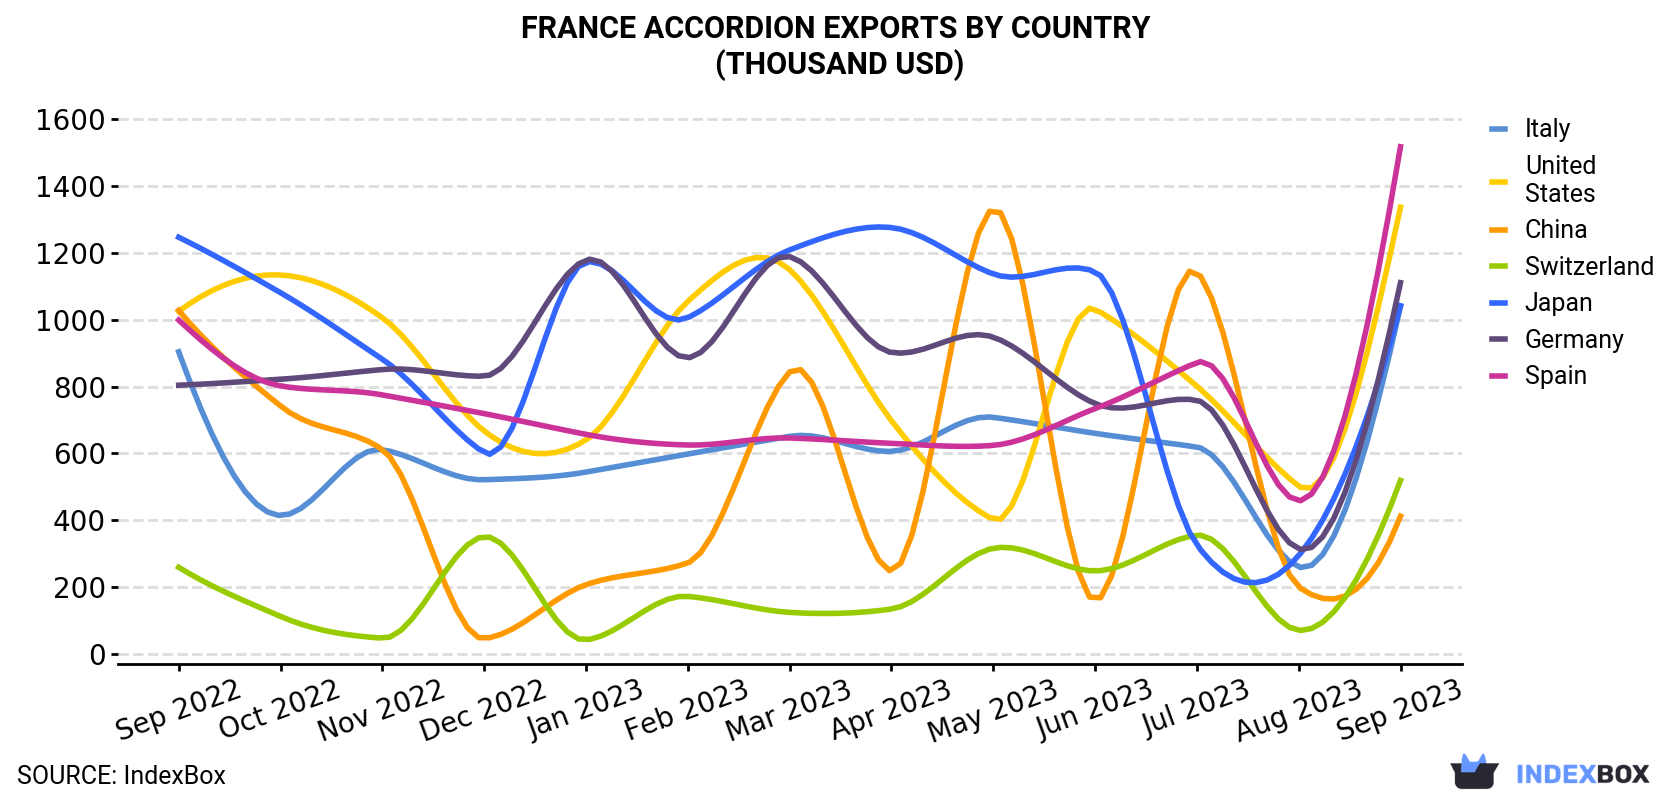 France Accordion Exports By Country (Thousand USD)